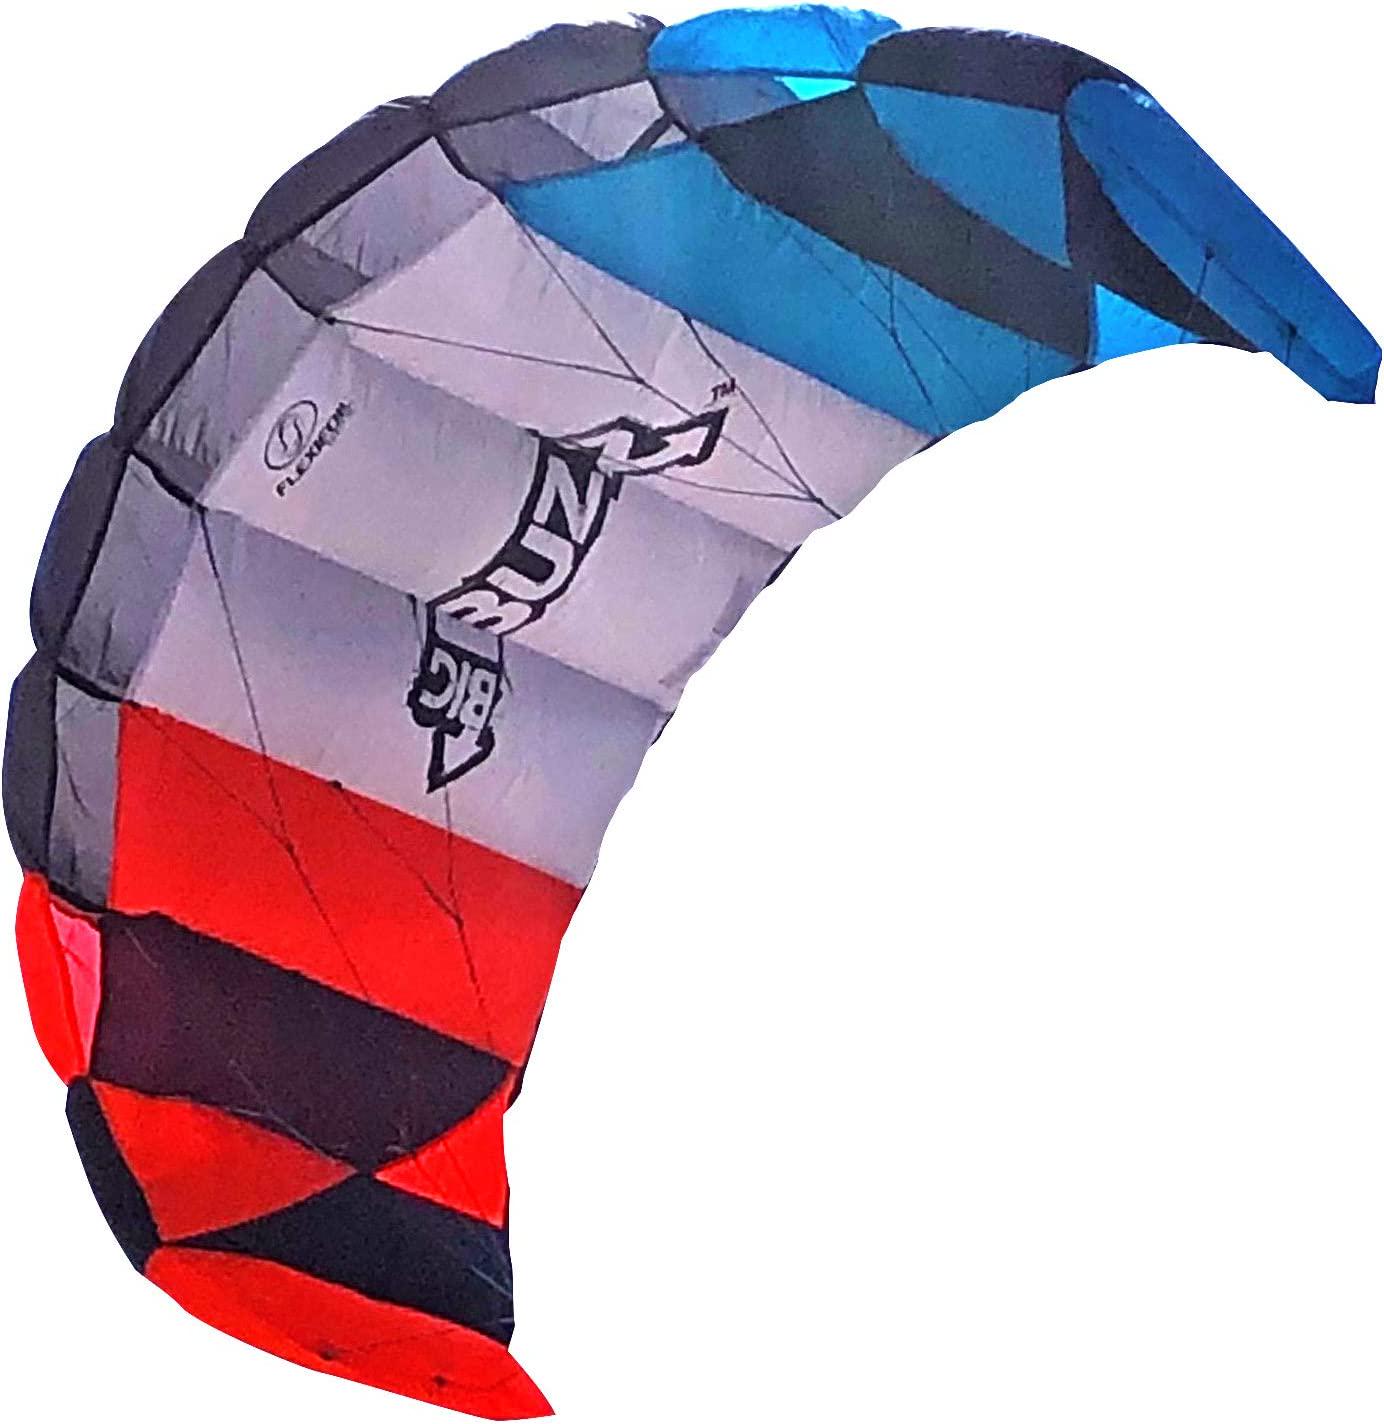 FLEXIFOIL, FLEXIFOIL 2.05m Power Kite Big Buzz Sport Foil | Kids and Adult Kiting | Beach Summer Trick Kites | Outside Stunt Toy | Outdoor Games and Family Activities | Two String Lines and Handles | Easy to Fly 1.6m²